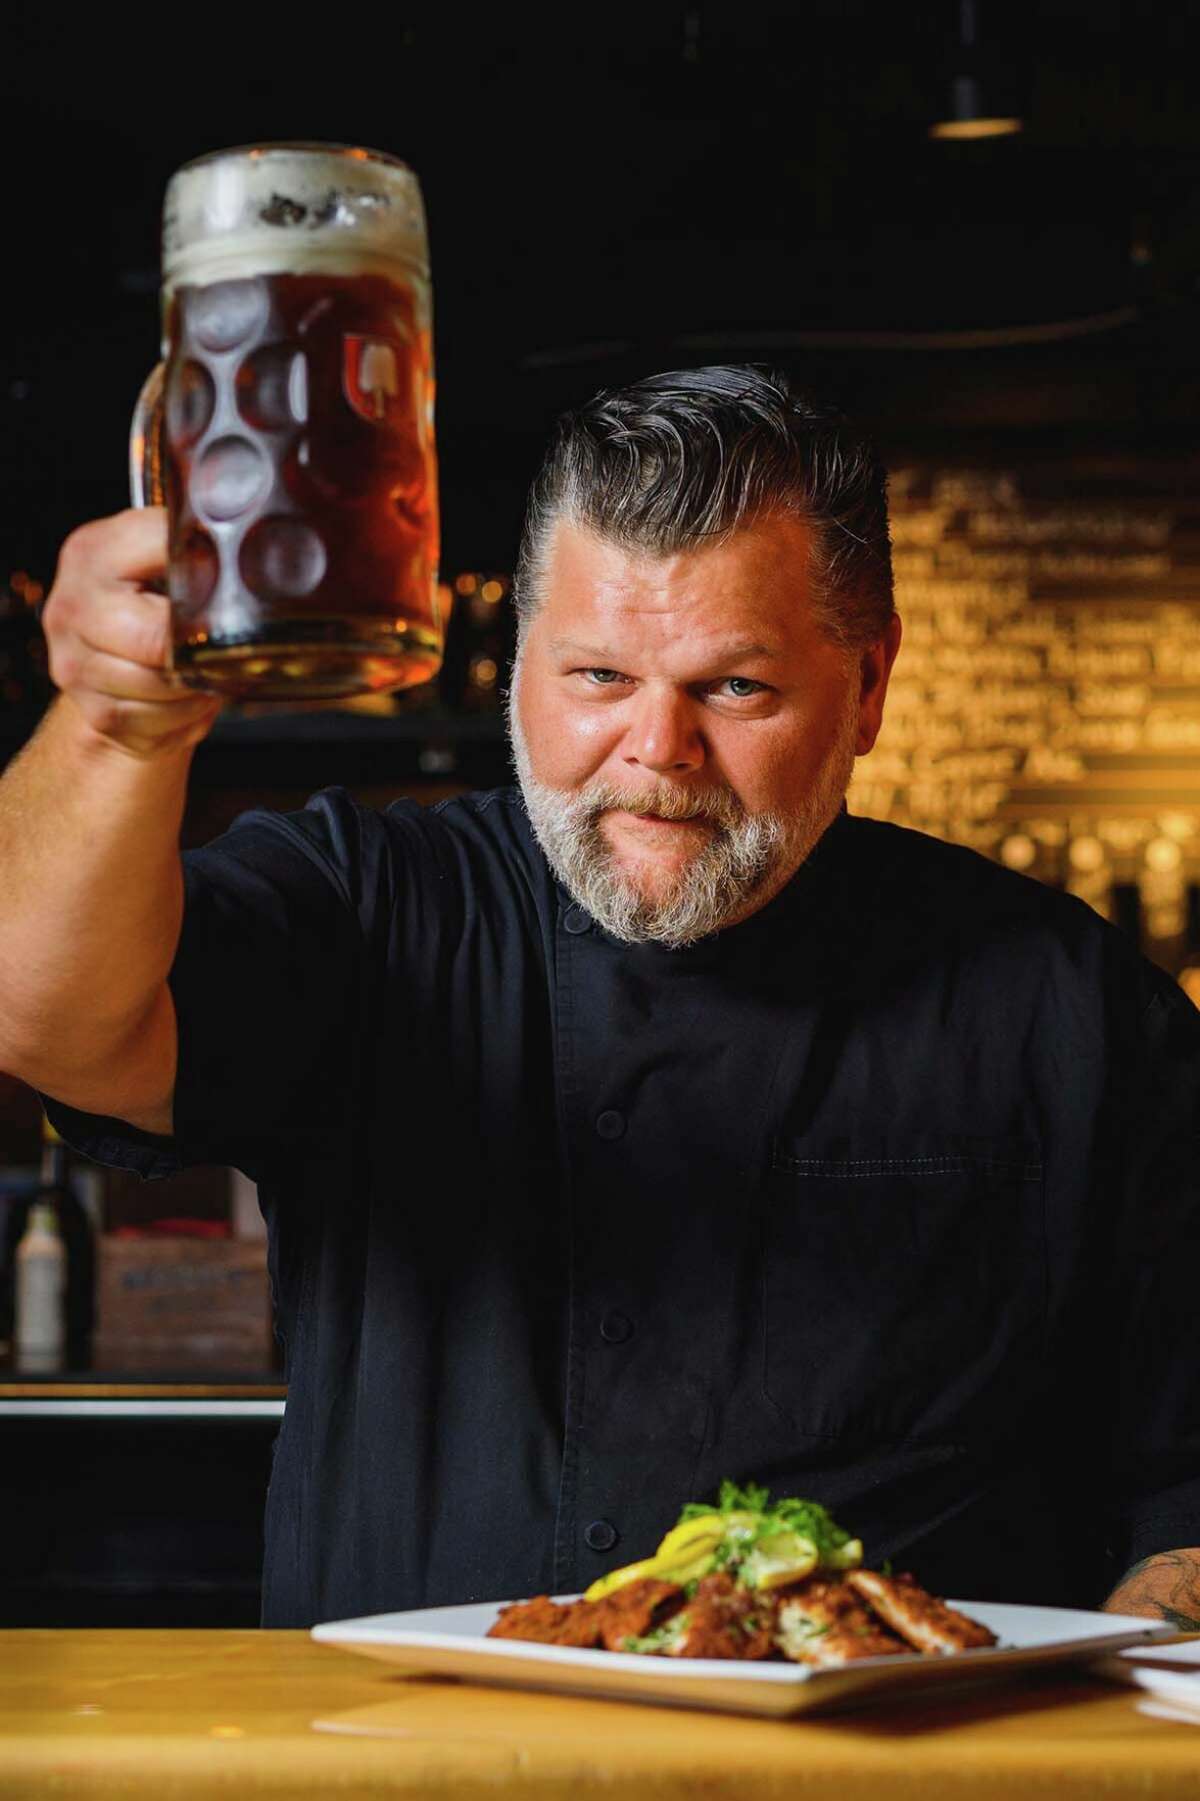 Bill Nemecek, owner and executive chef at Celtic Cavern